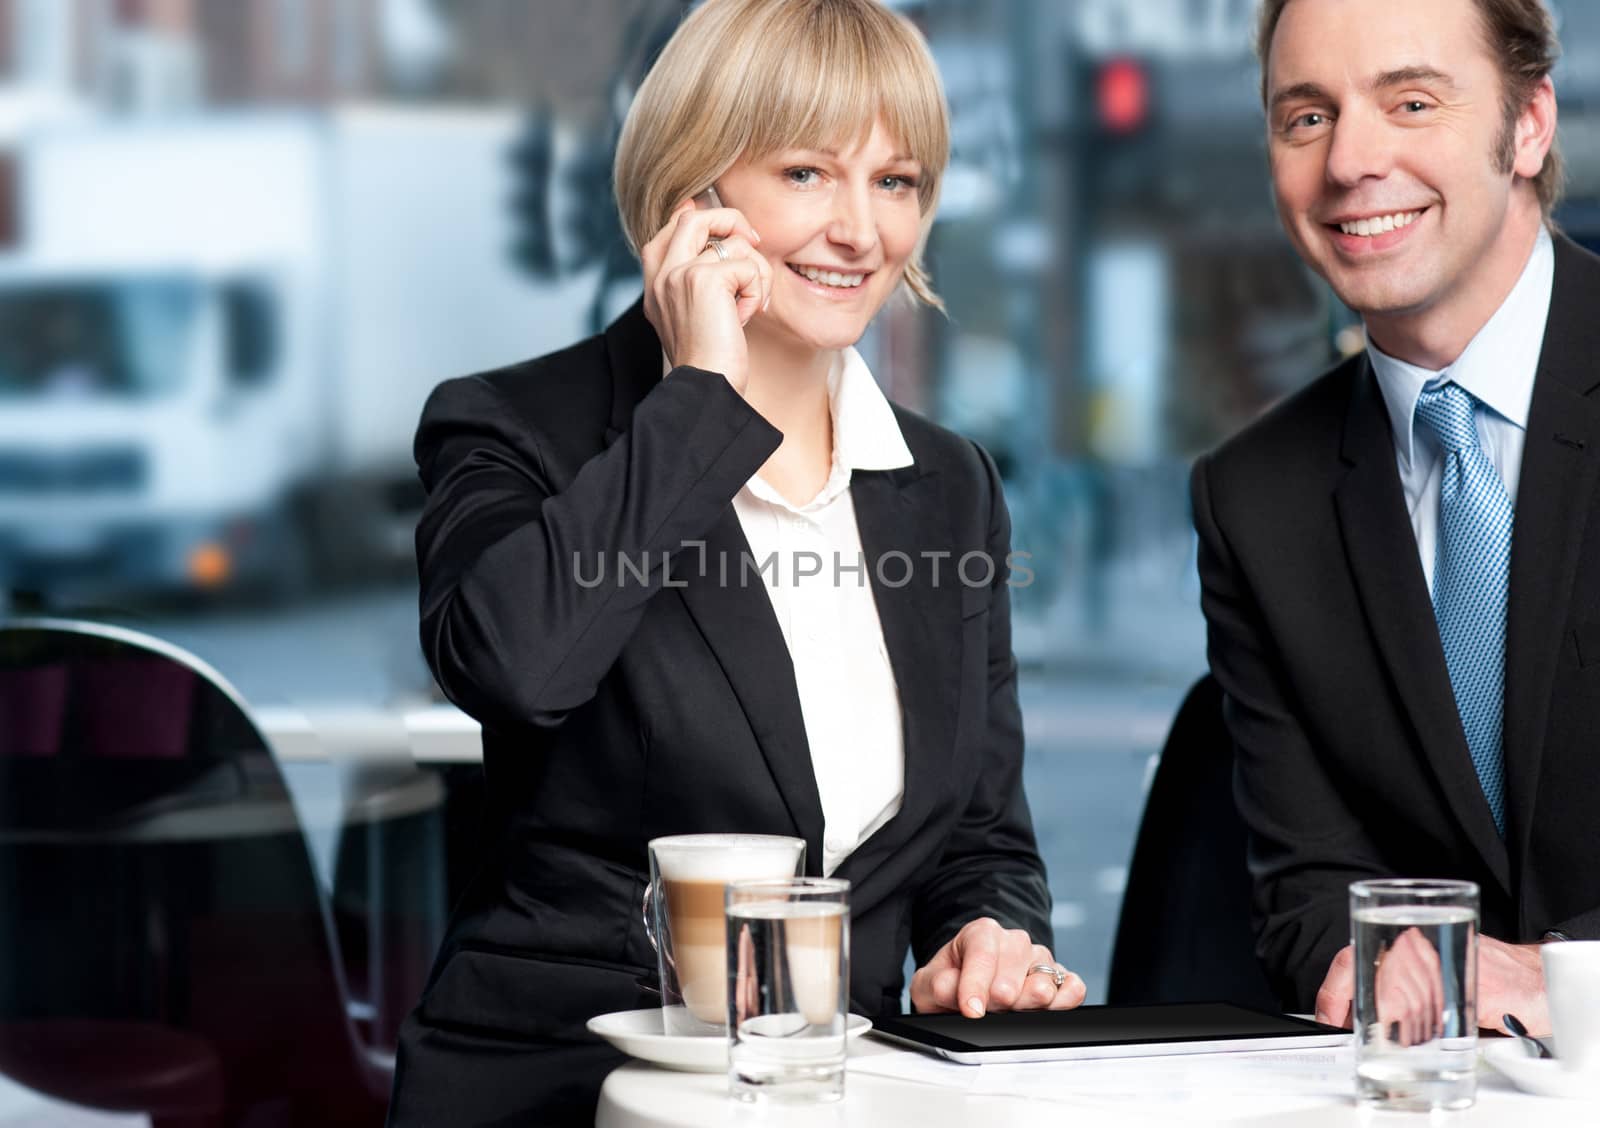 Business partners enjoying coffee while discussing work in open-air restaurant.